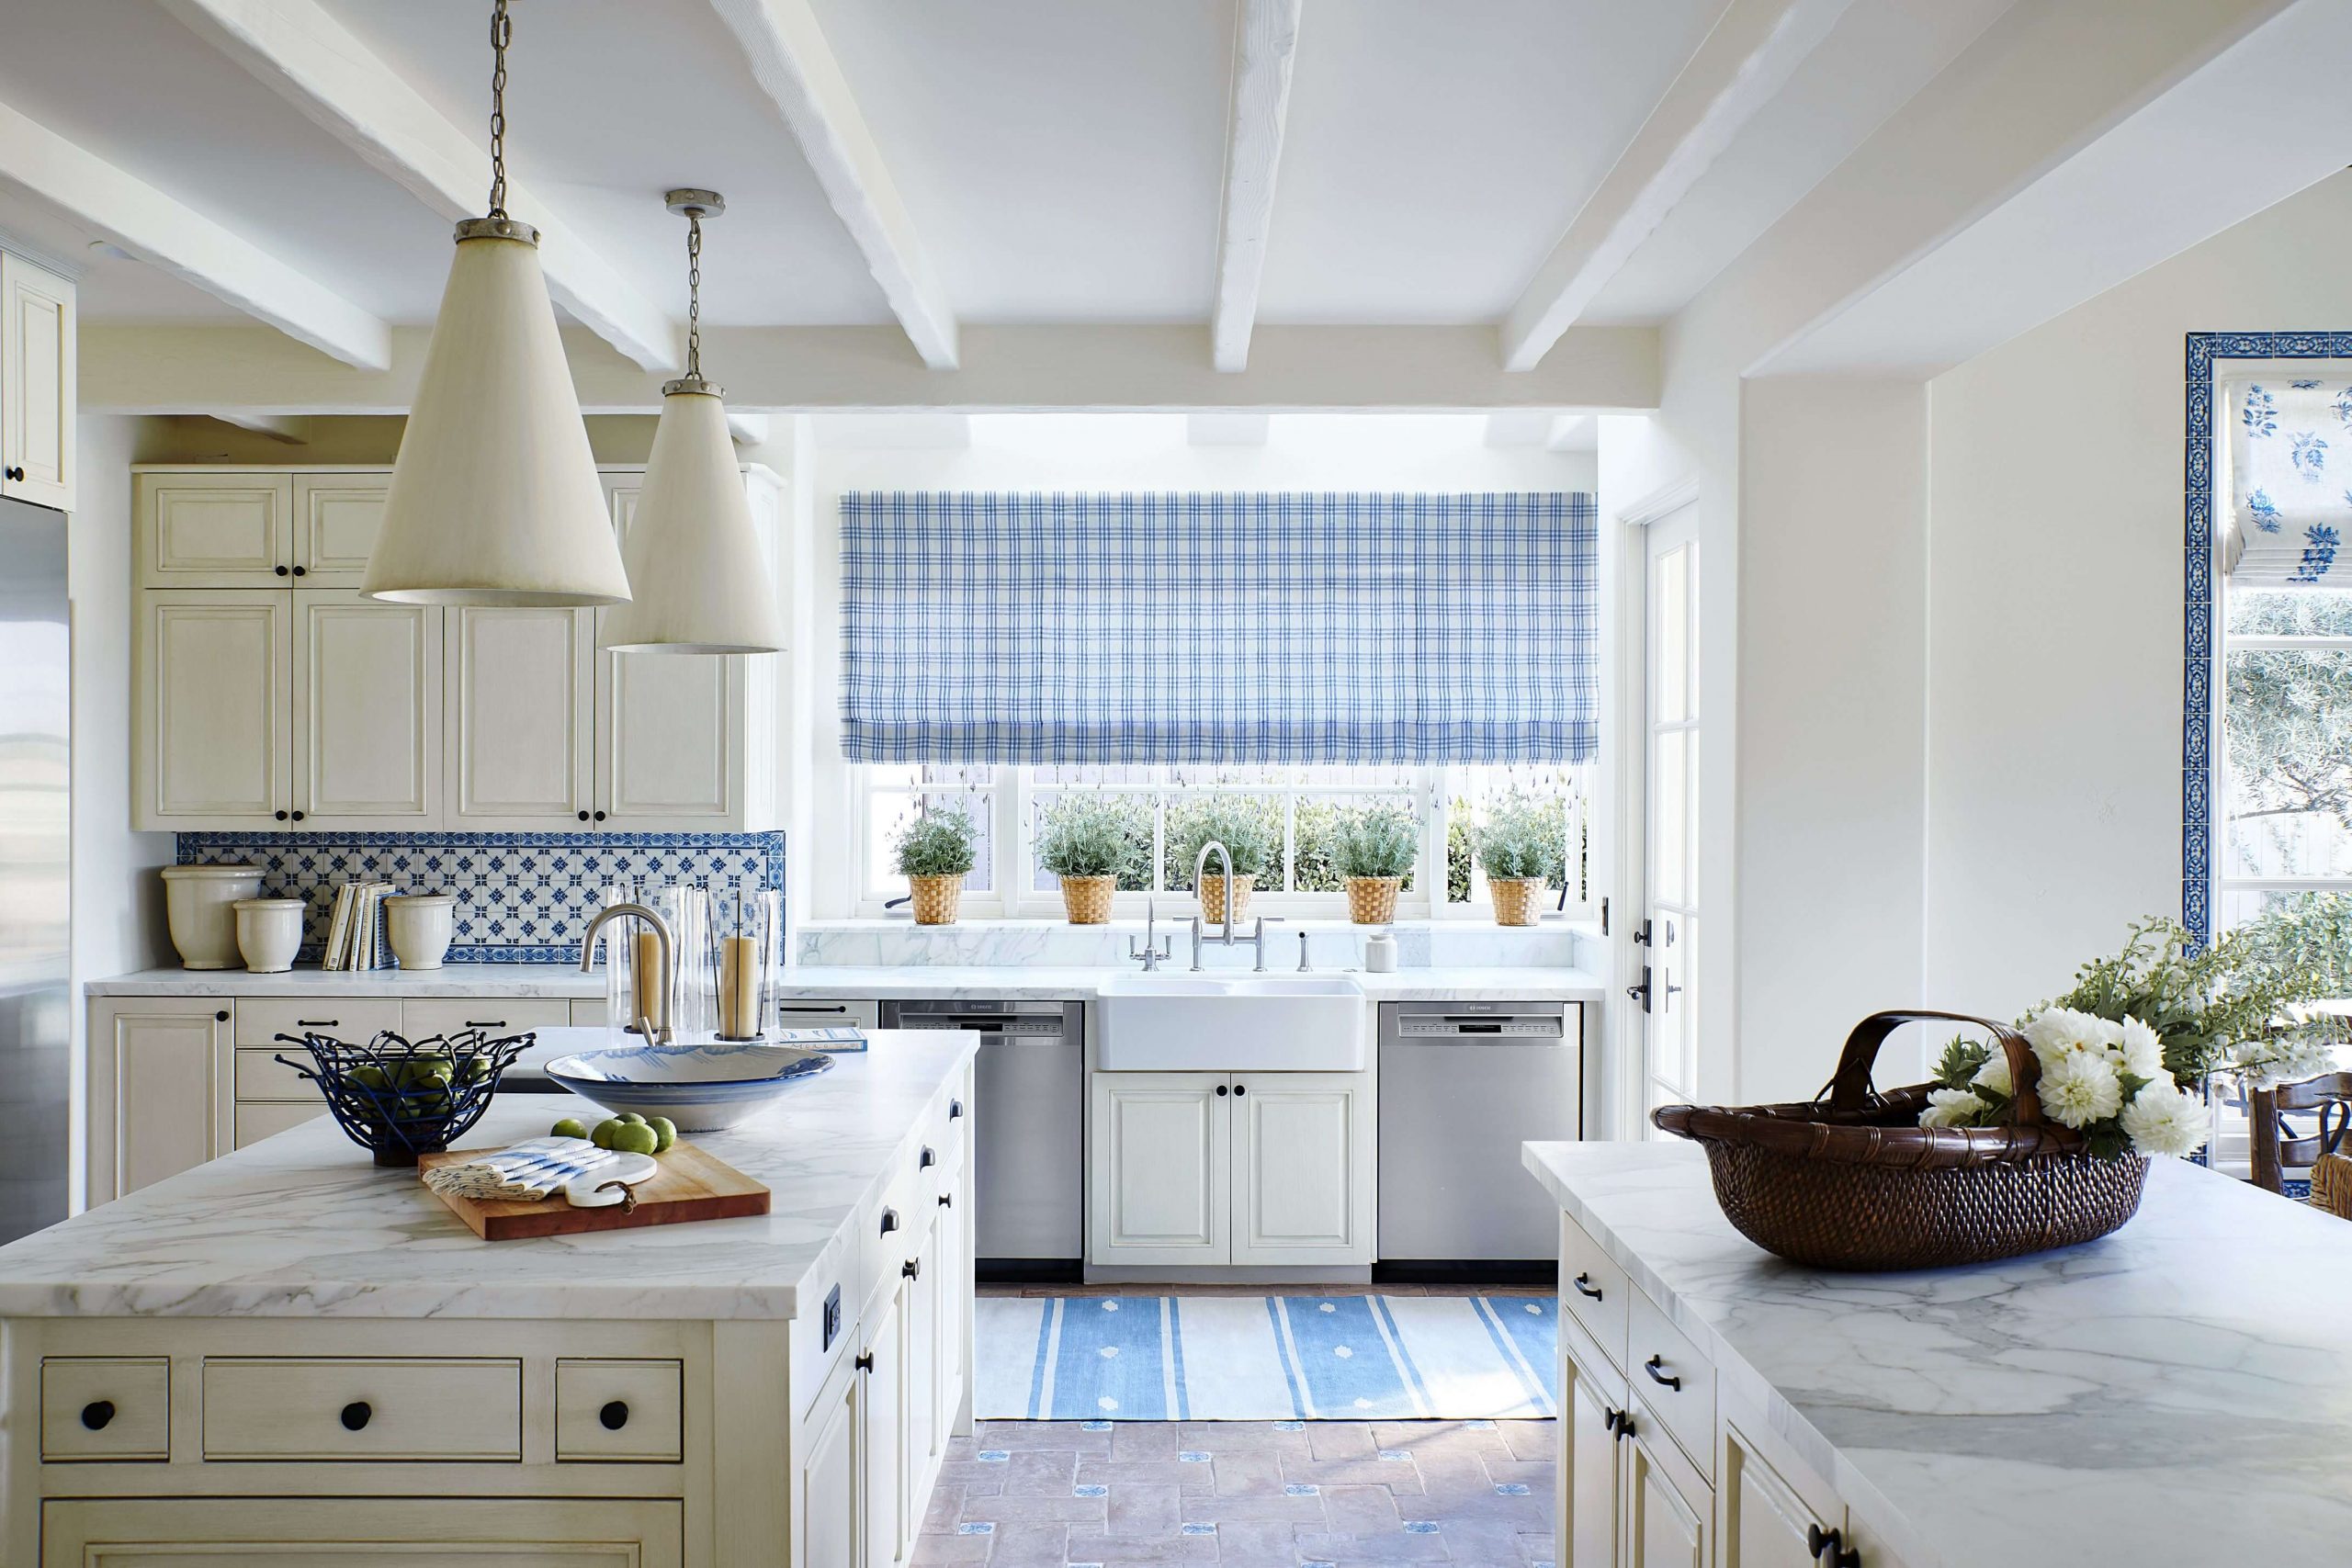 How to Find the Best Colors For Your Kitchen Interiors